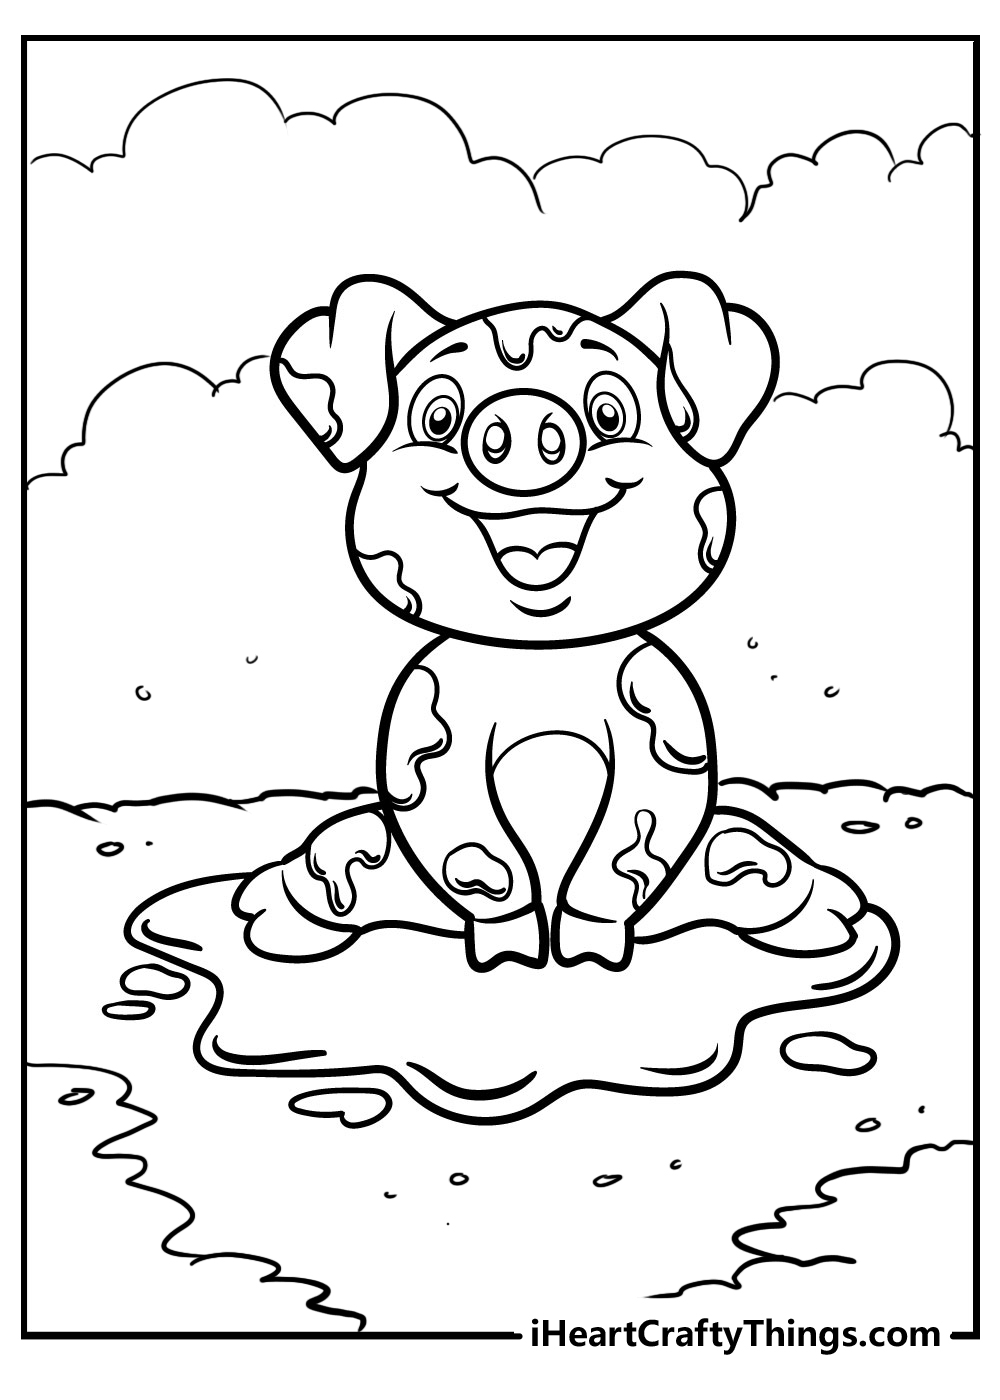 pigs-coloring-pages-printable-printable-world-holiday